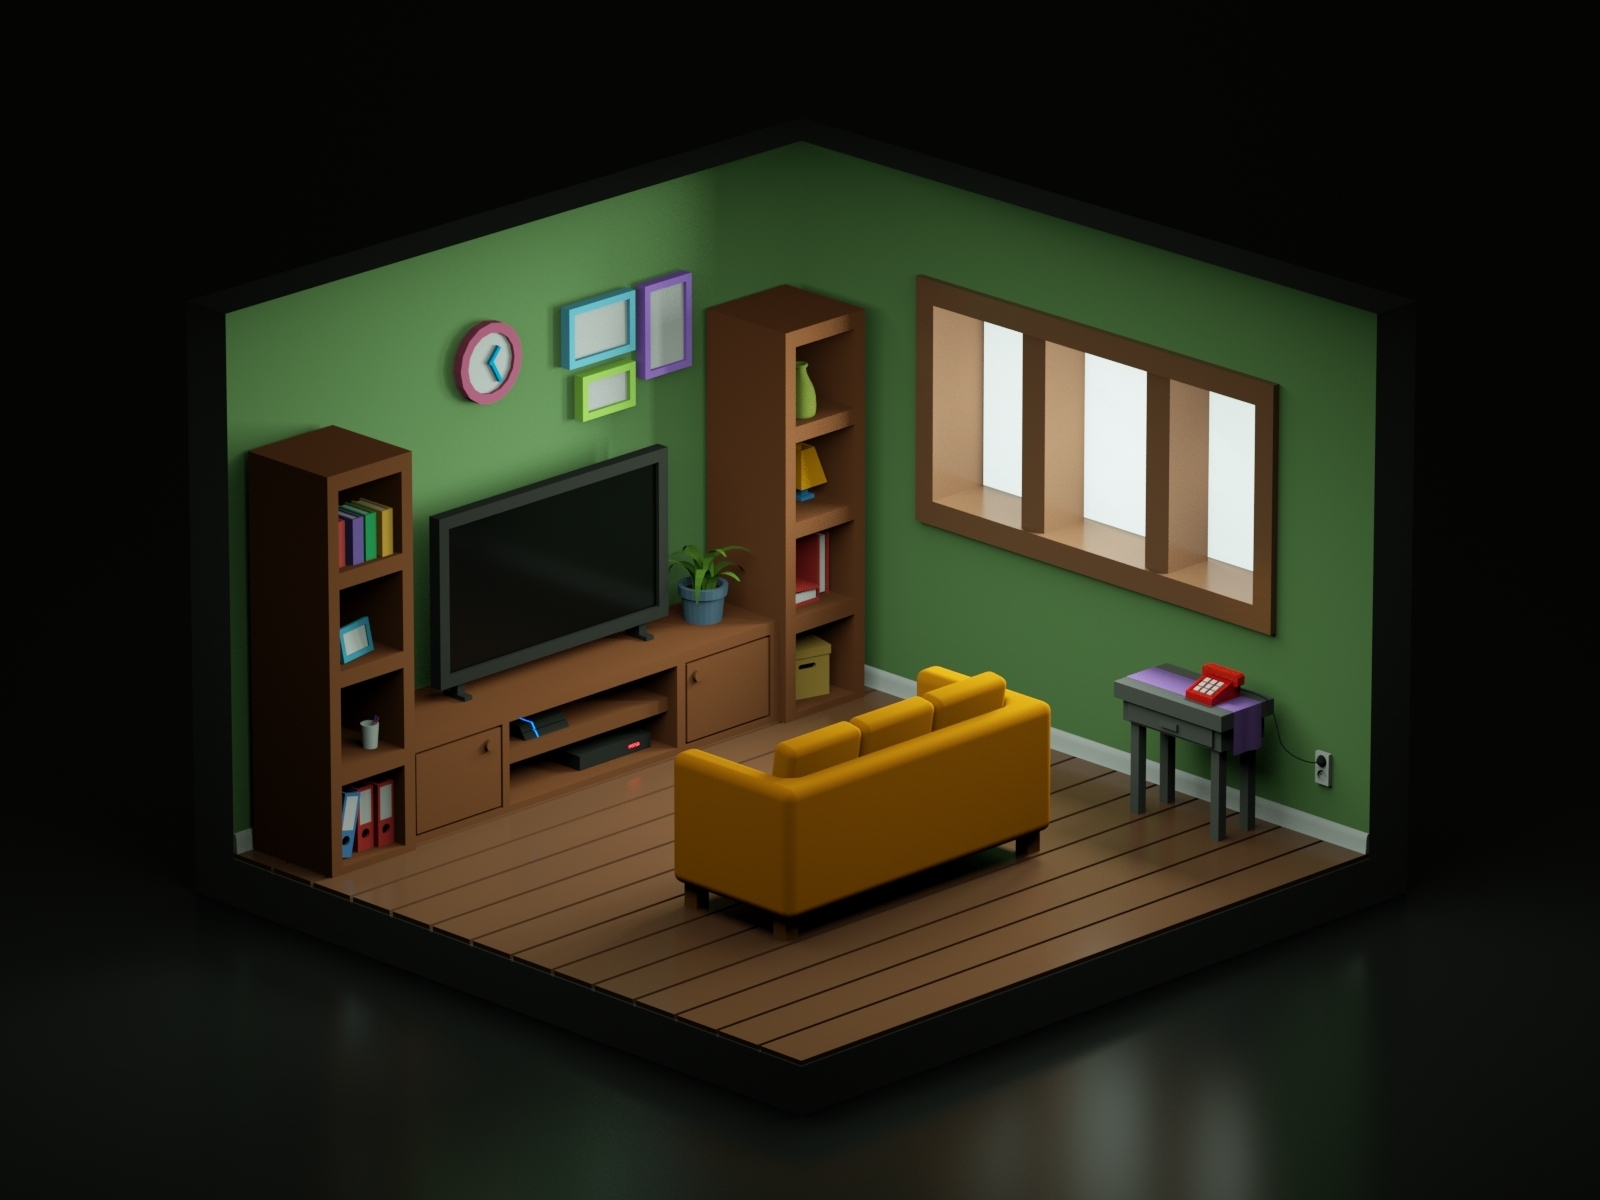 Cozy How To Make A 3D Room In Illustrator for Gamers